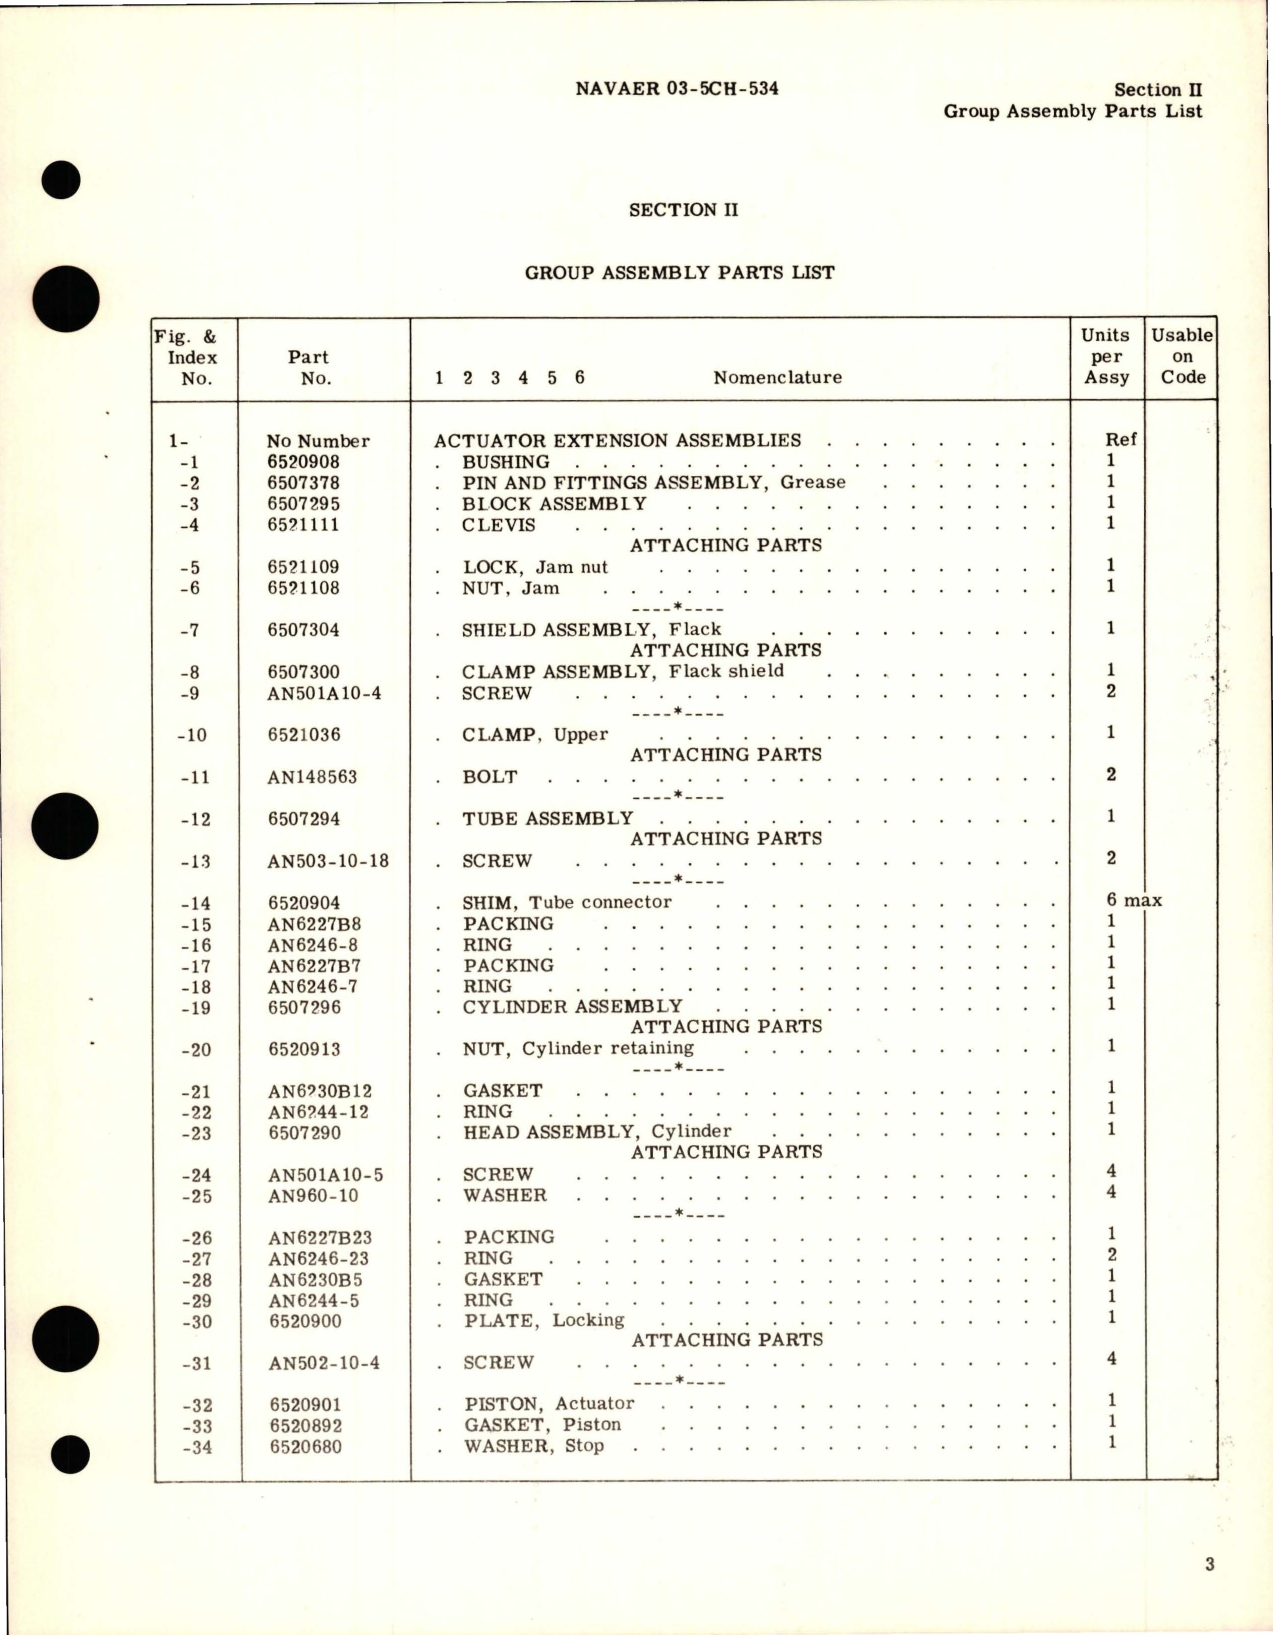 Sample page 7 from AirCorps Library document: Illustrated Parts Breakdown for Actuator - Model AAHL-B2 